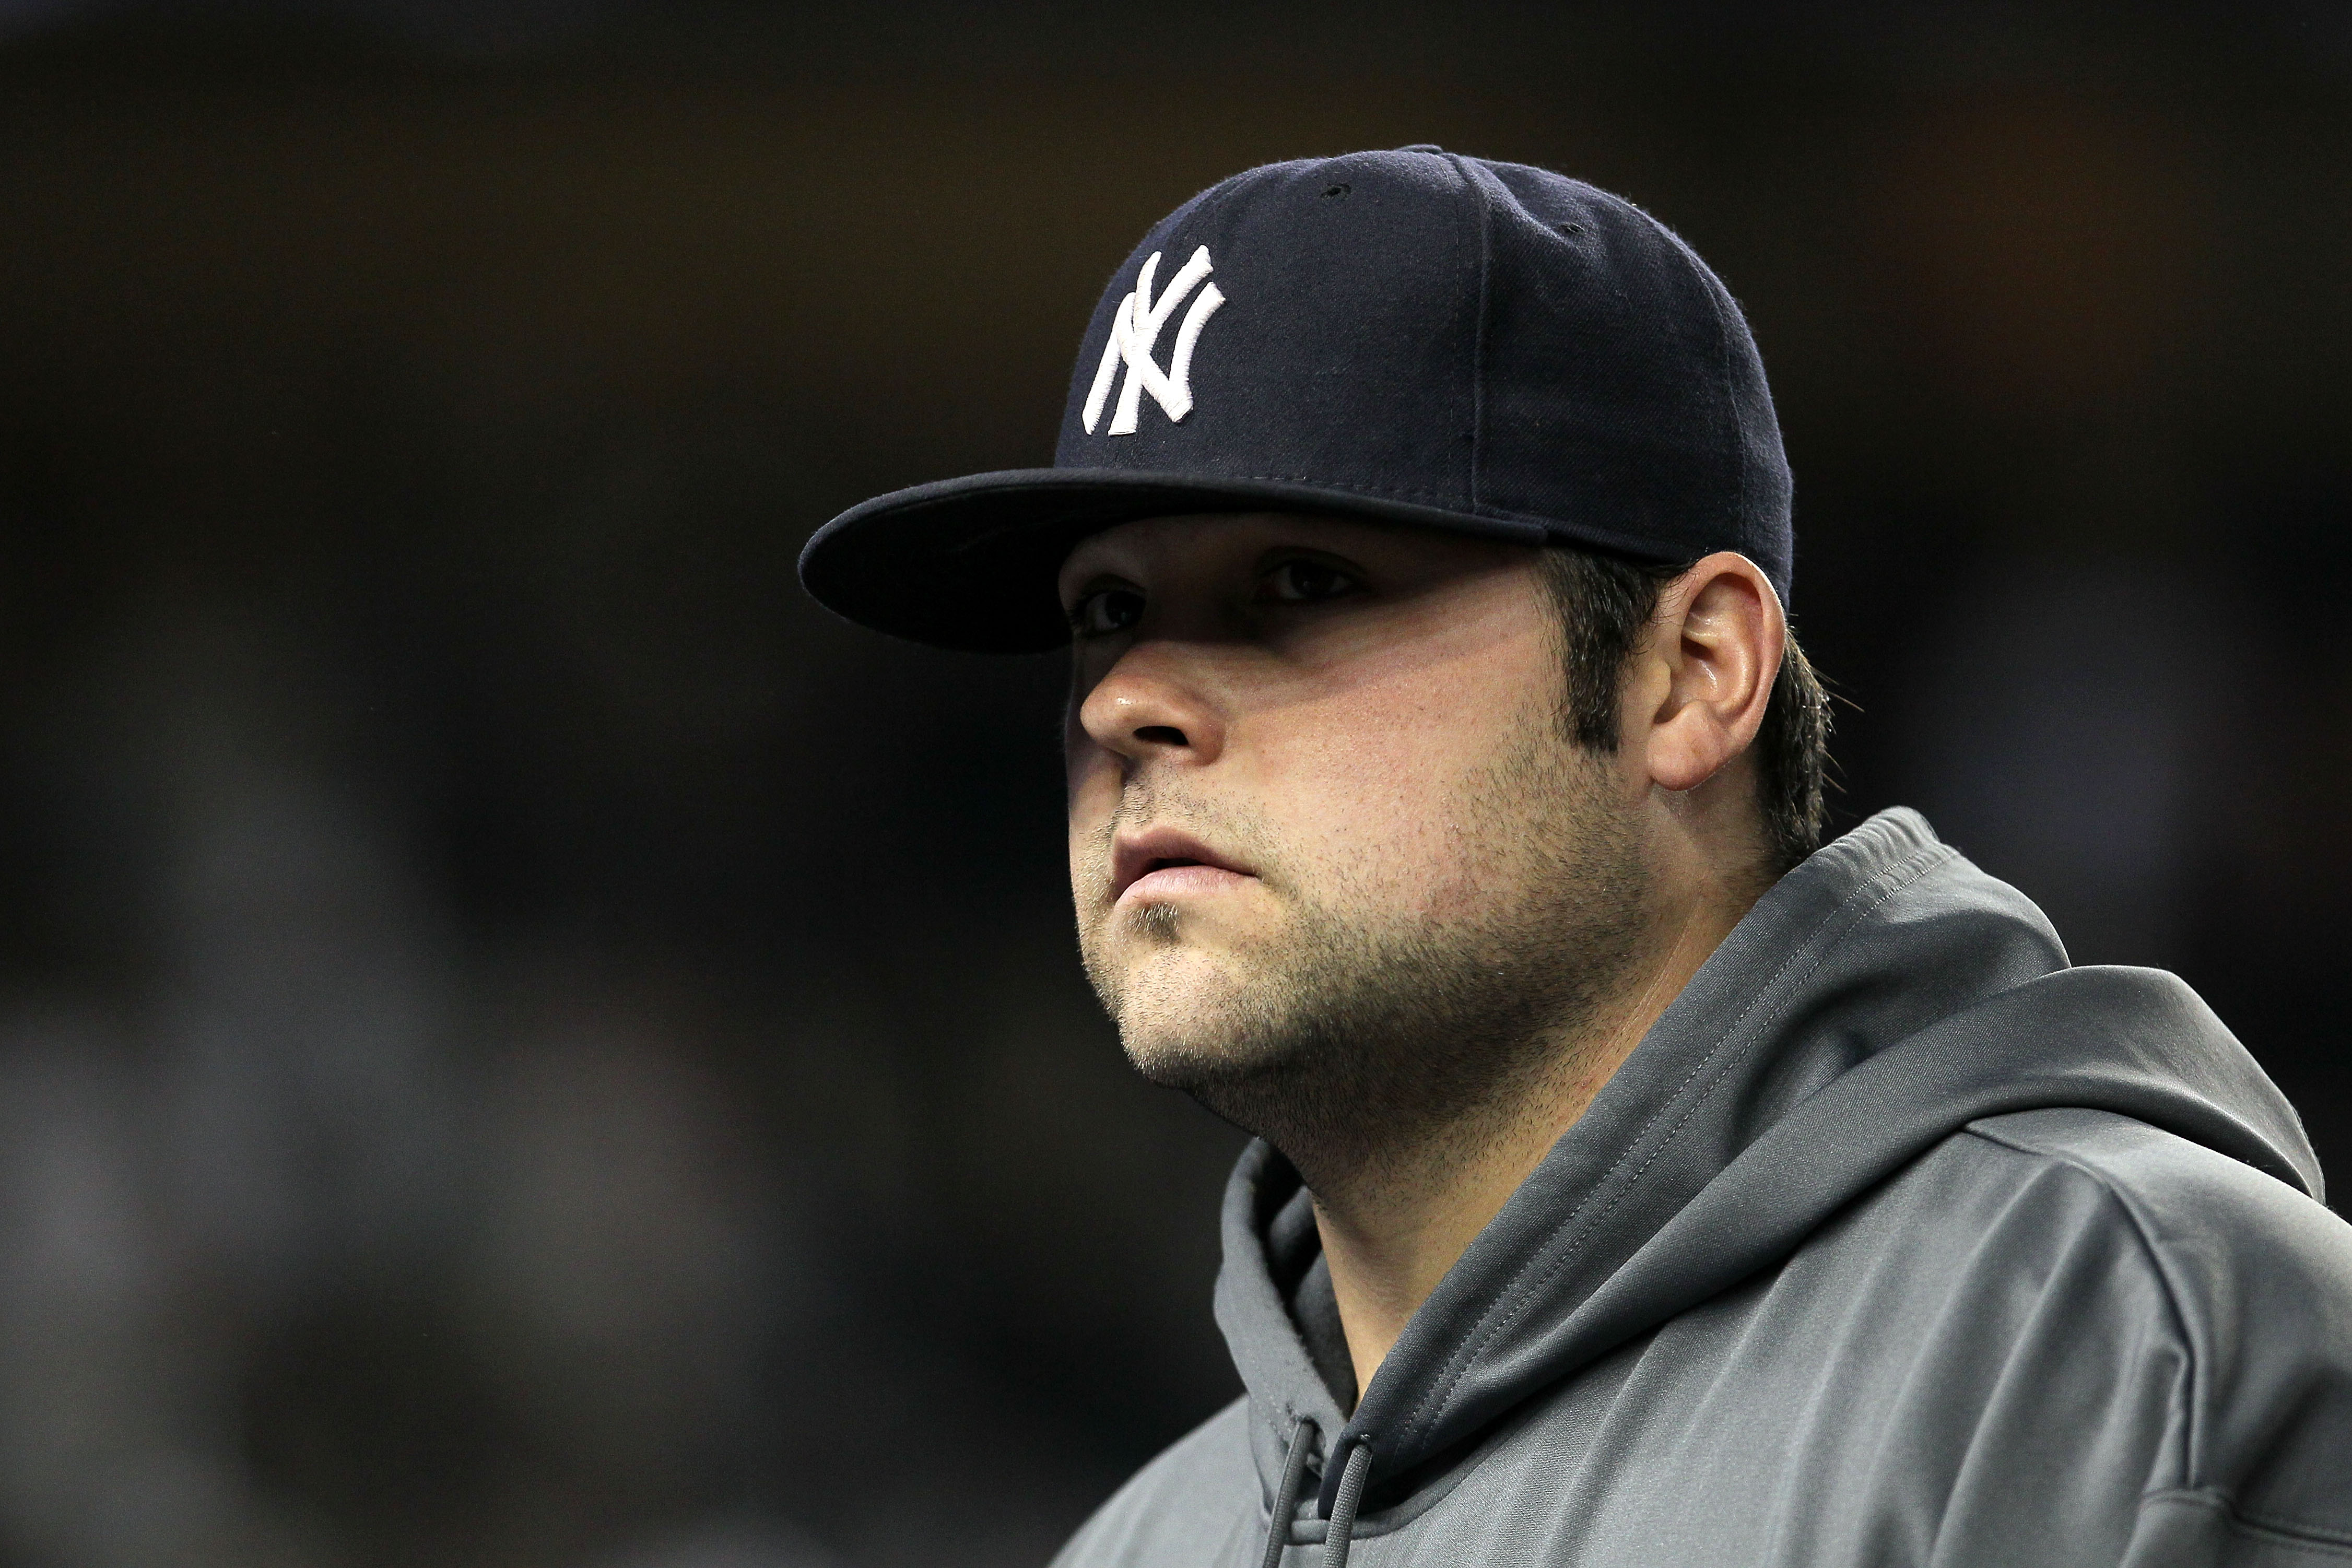 NEW YORK - OCTOBER 19:  Joba Chamberlain #62 of the New York Yankees looks on against the Texas Rangers in Game Four of the ALCS during the 2010 MLB Playoffs at Yankee Stadium on October 19, 2010 in the Bronx borough of New York City.  (Photo by Jim McIsa